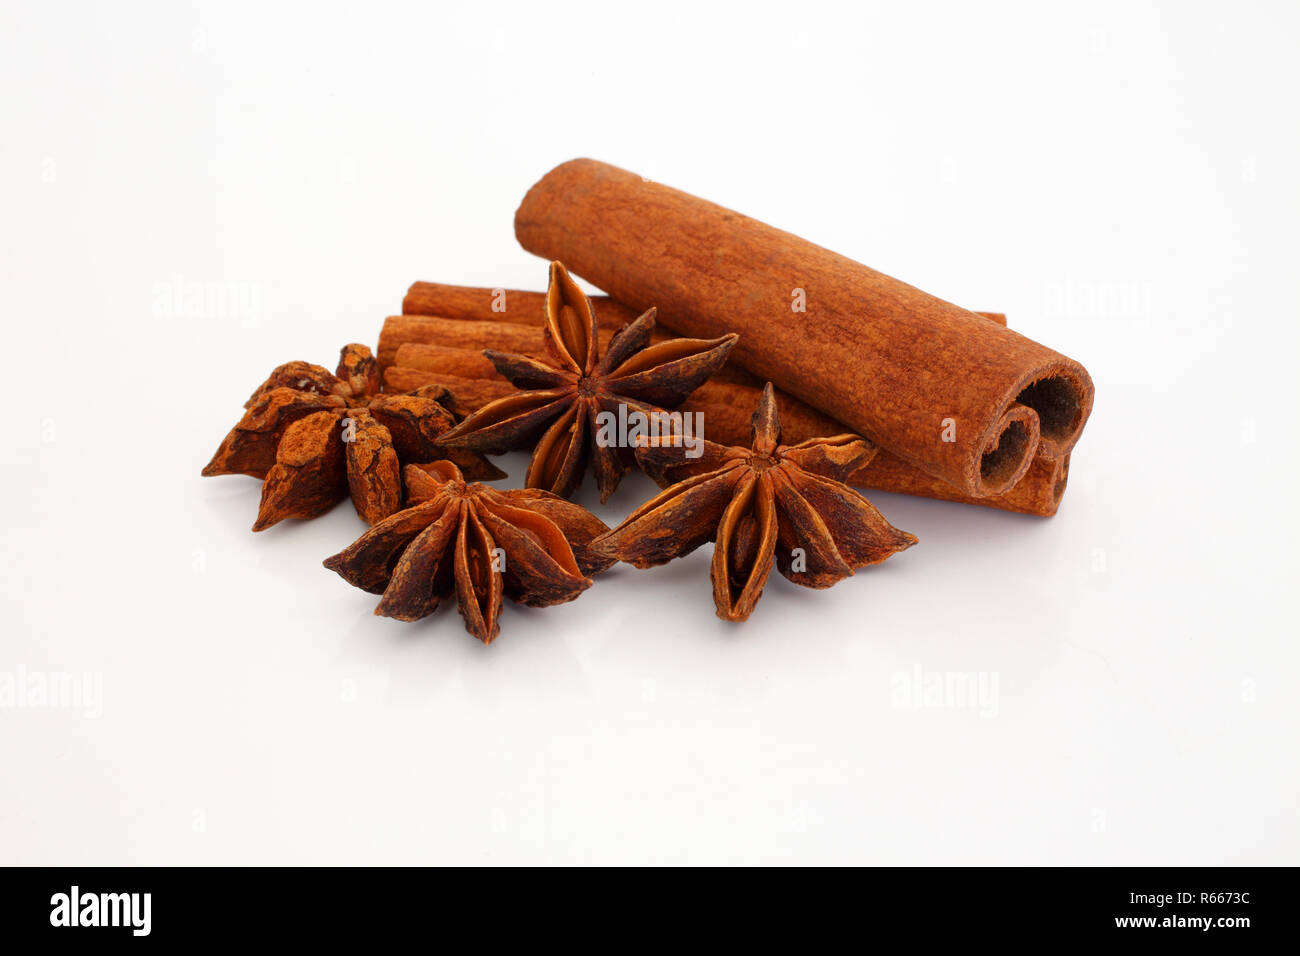 Cinnamon sticks and star aniseed on white reflective background. Selective focus. Macro. Stock Photo